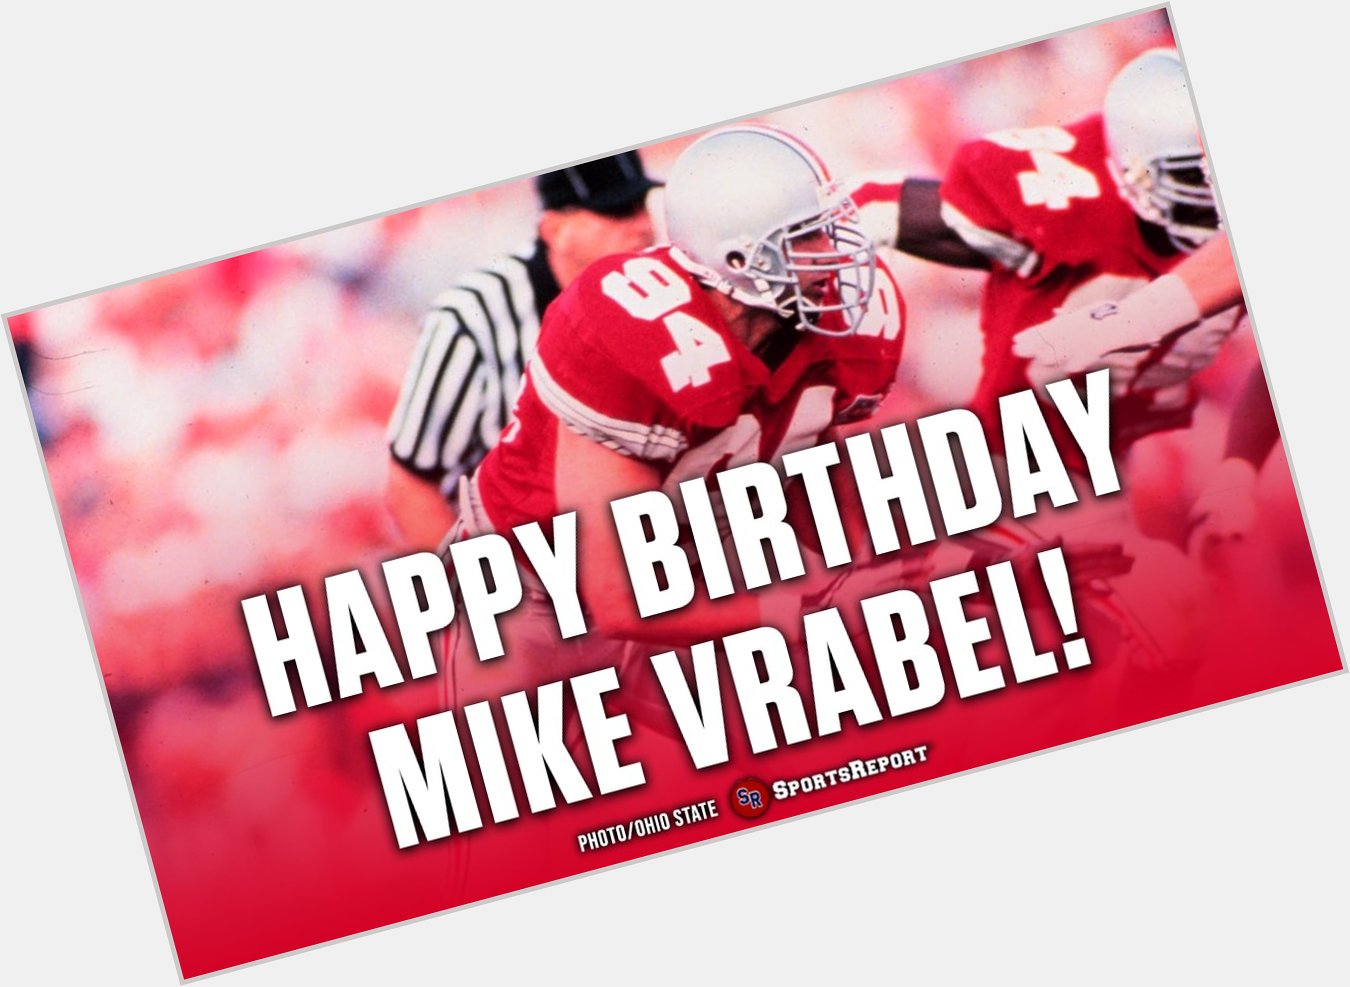  Fans, let\s wish legend Mike Vrabel a Happy Birthday! 